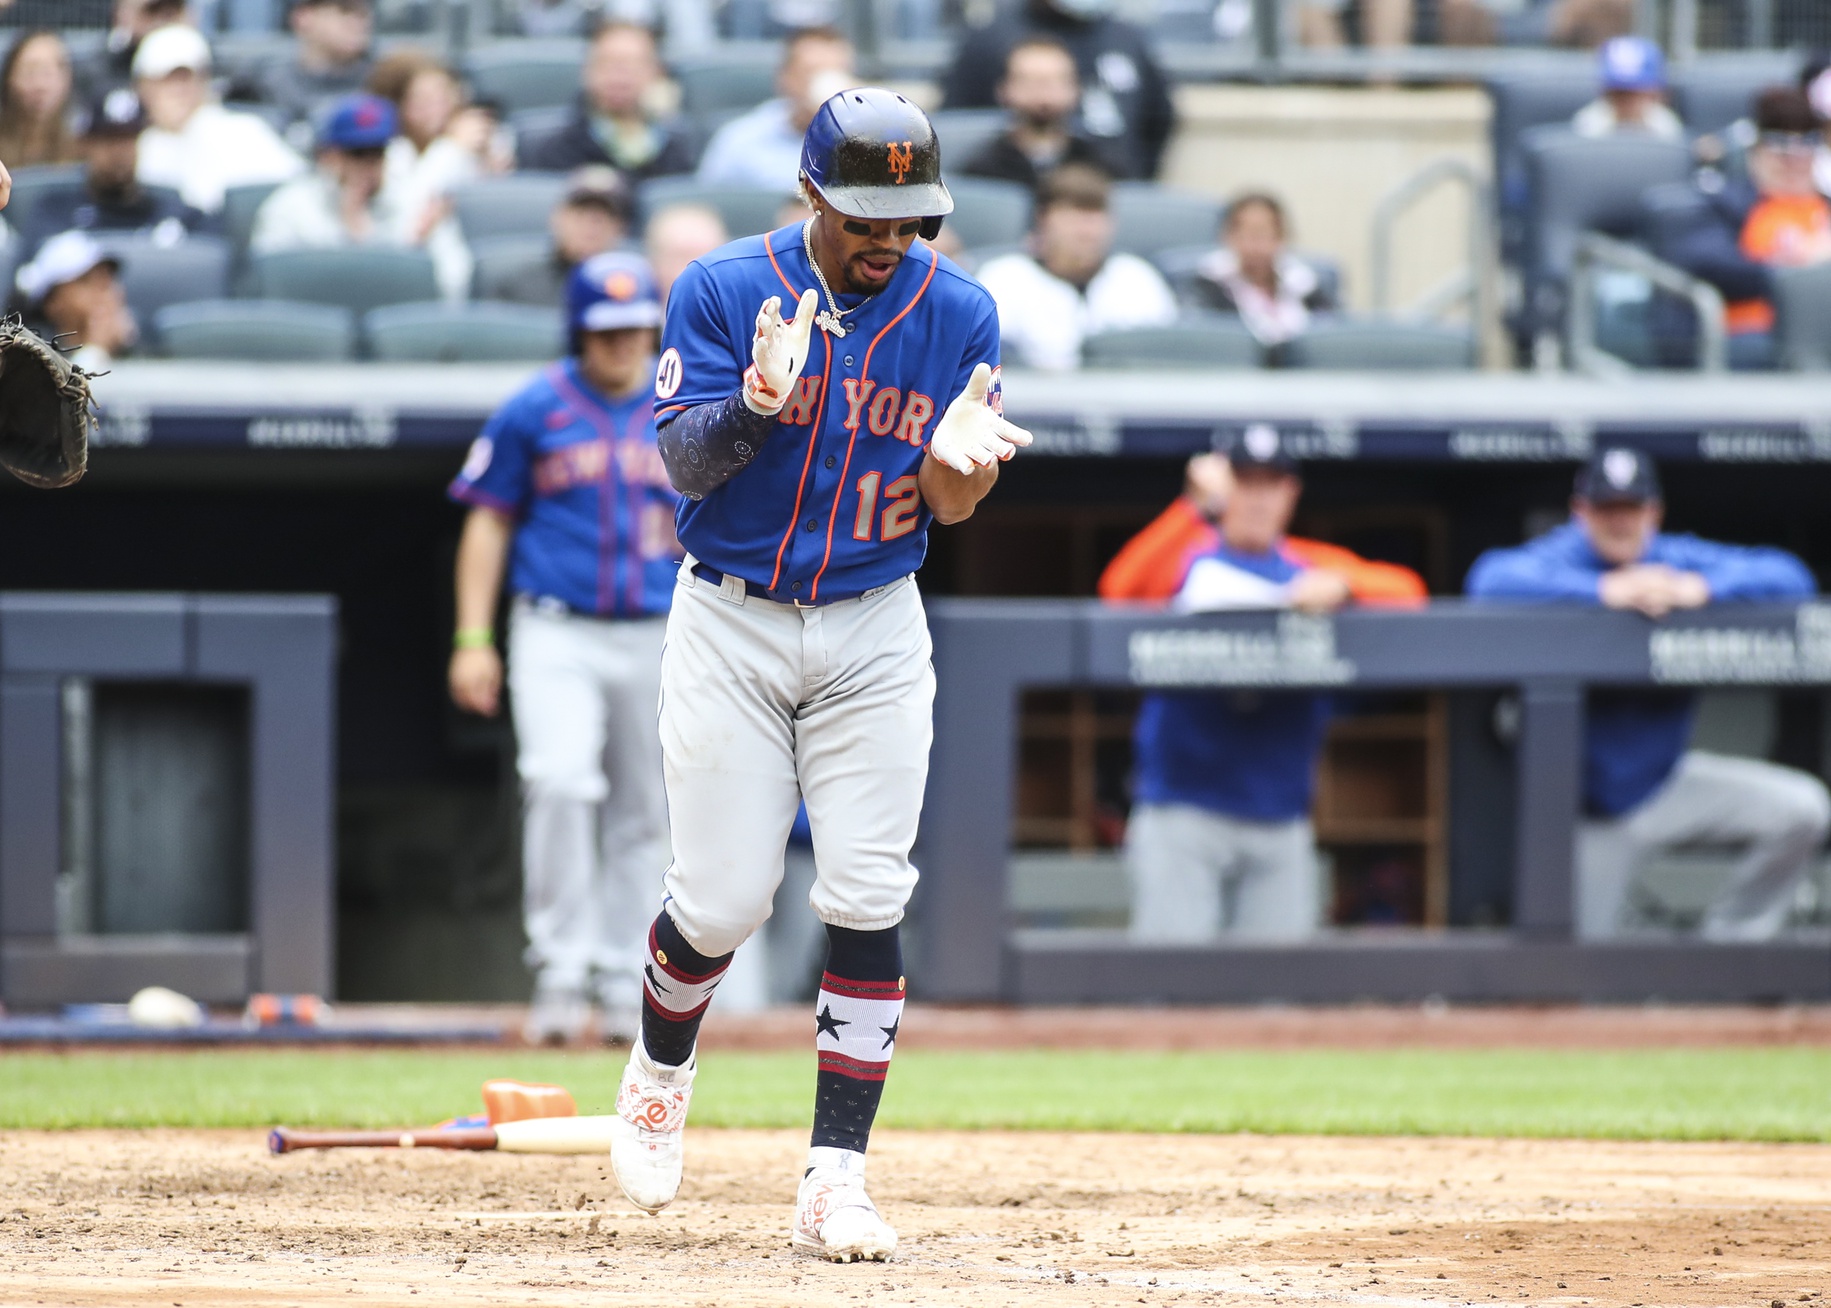 Five-Run Sixth Fuels Mets to 8-3 Victory in Game 1 of Subway Series